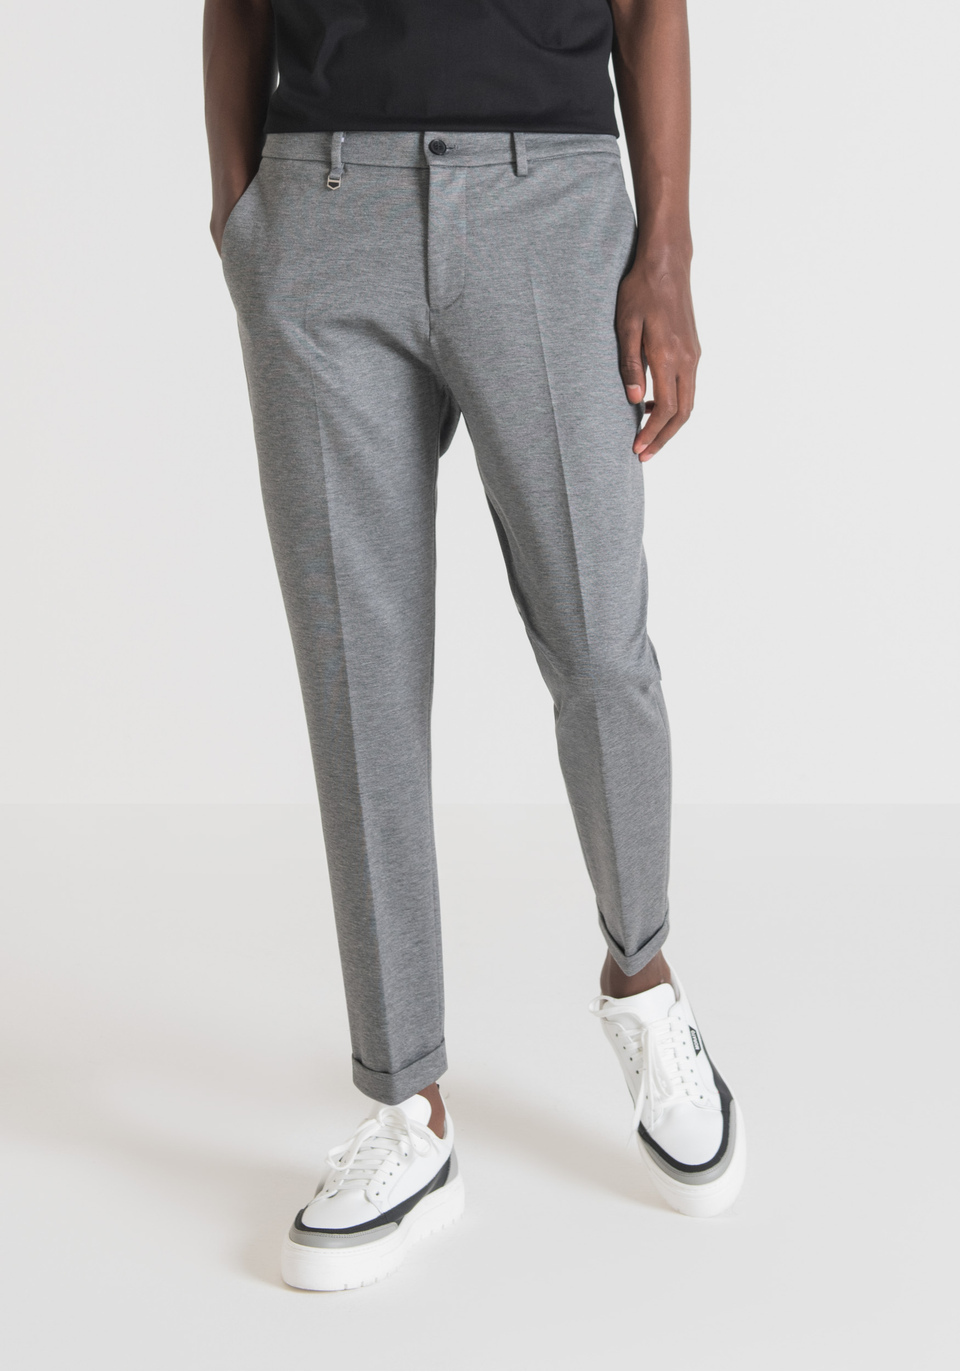 “ASHE” SUPER SKINNY FIT TROUSERS IN MILAN STITCH FABRIC - Antony Morato Online Shop